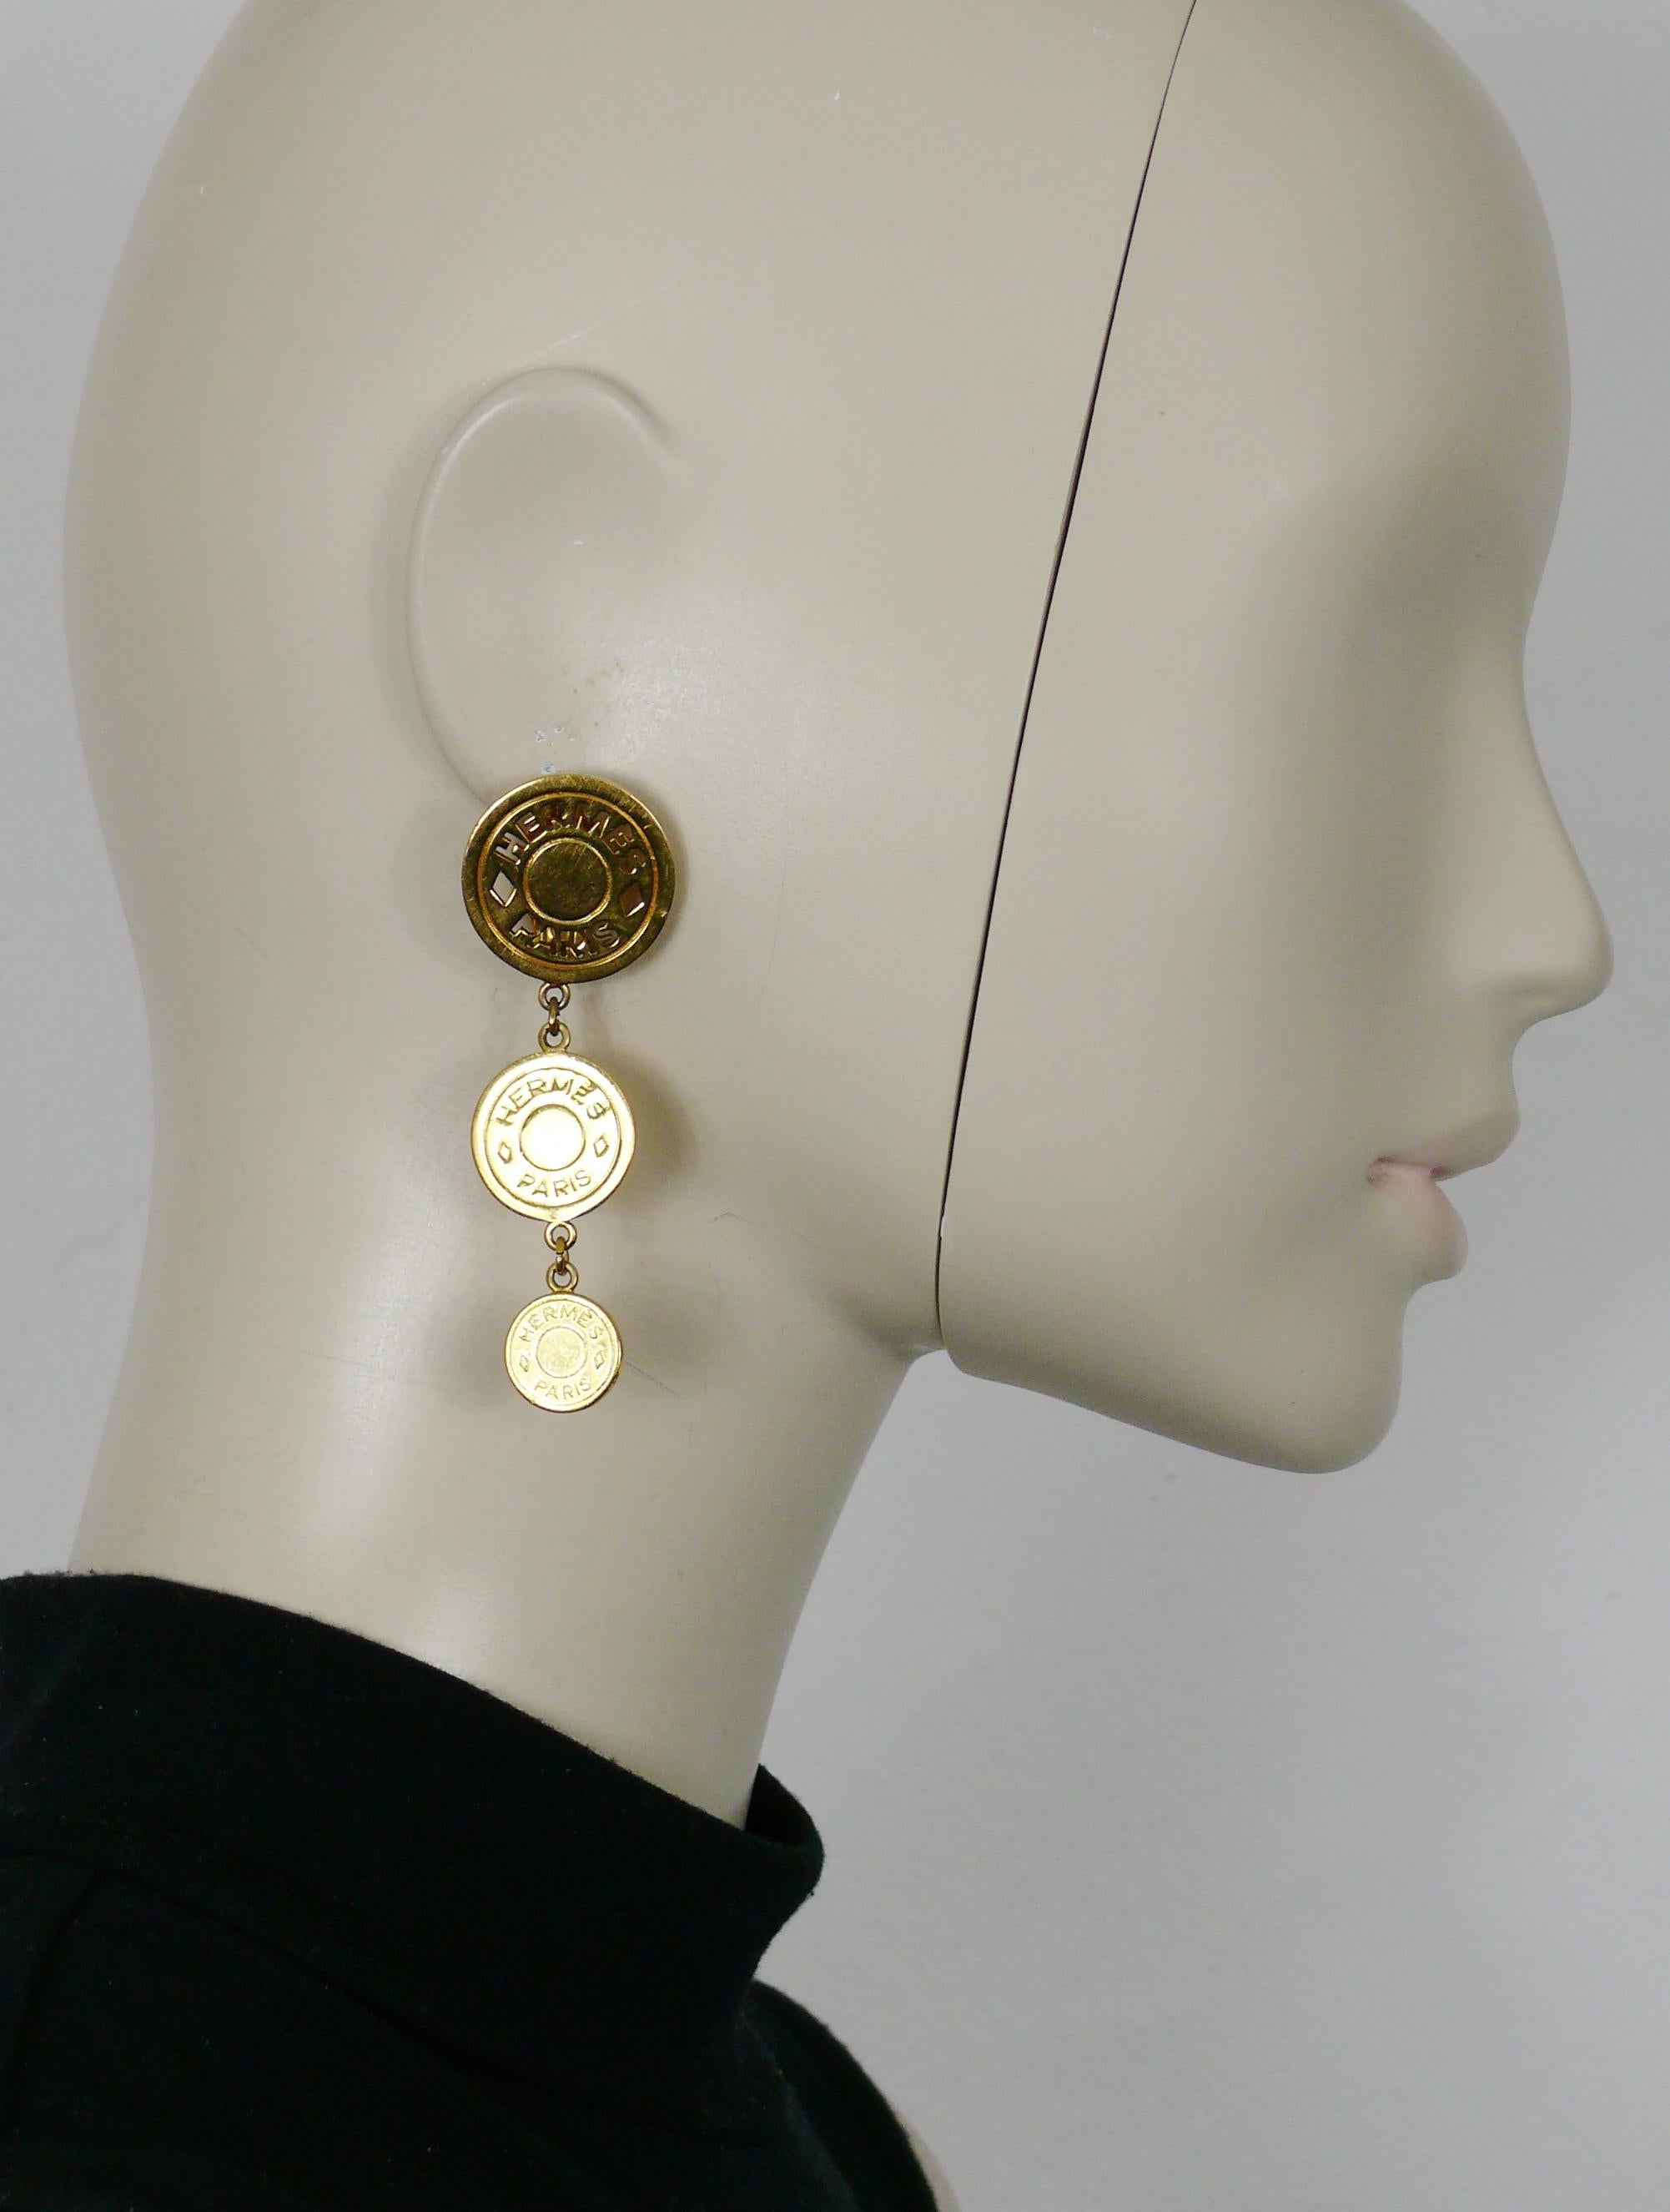 HERMES vintage gold tone dangling earrings (clip on) featuring three graduated clou de selle coins with cut-out and embossed HERMES PARIS logos.

Embossed HERMES PARIS Bijouterie Fantaisie.

Indicative measurements : max. height approx. 7.4 cm (2.91